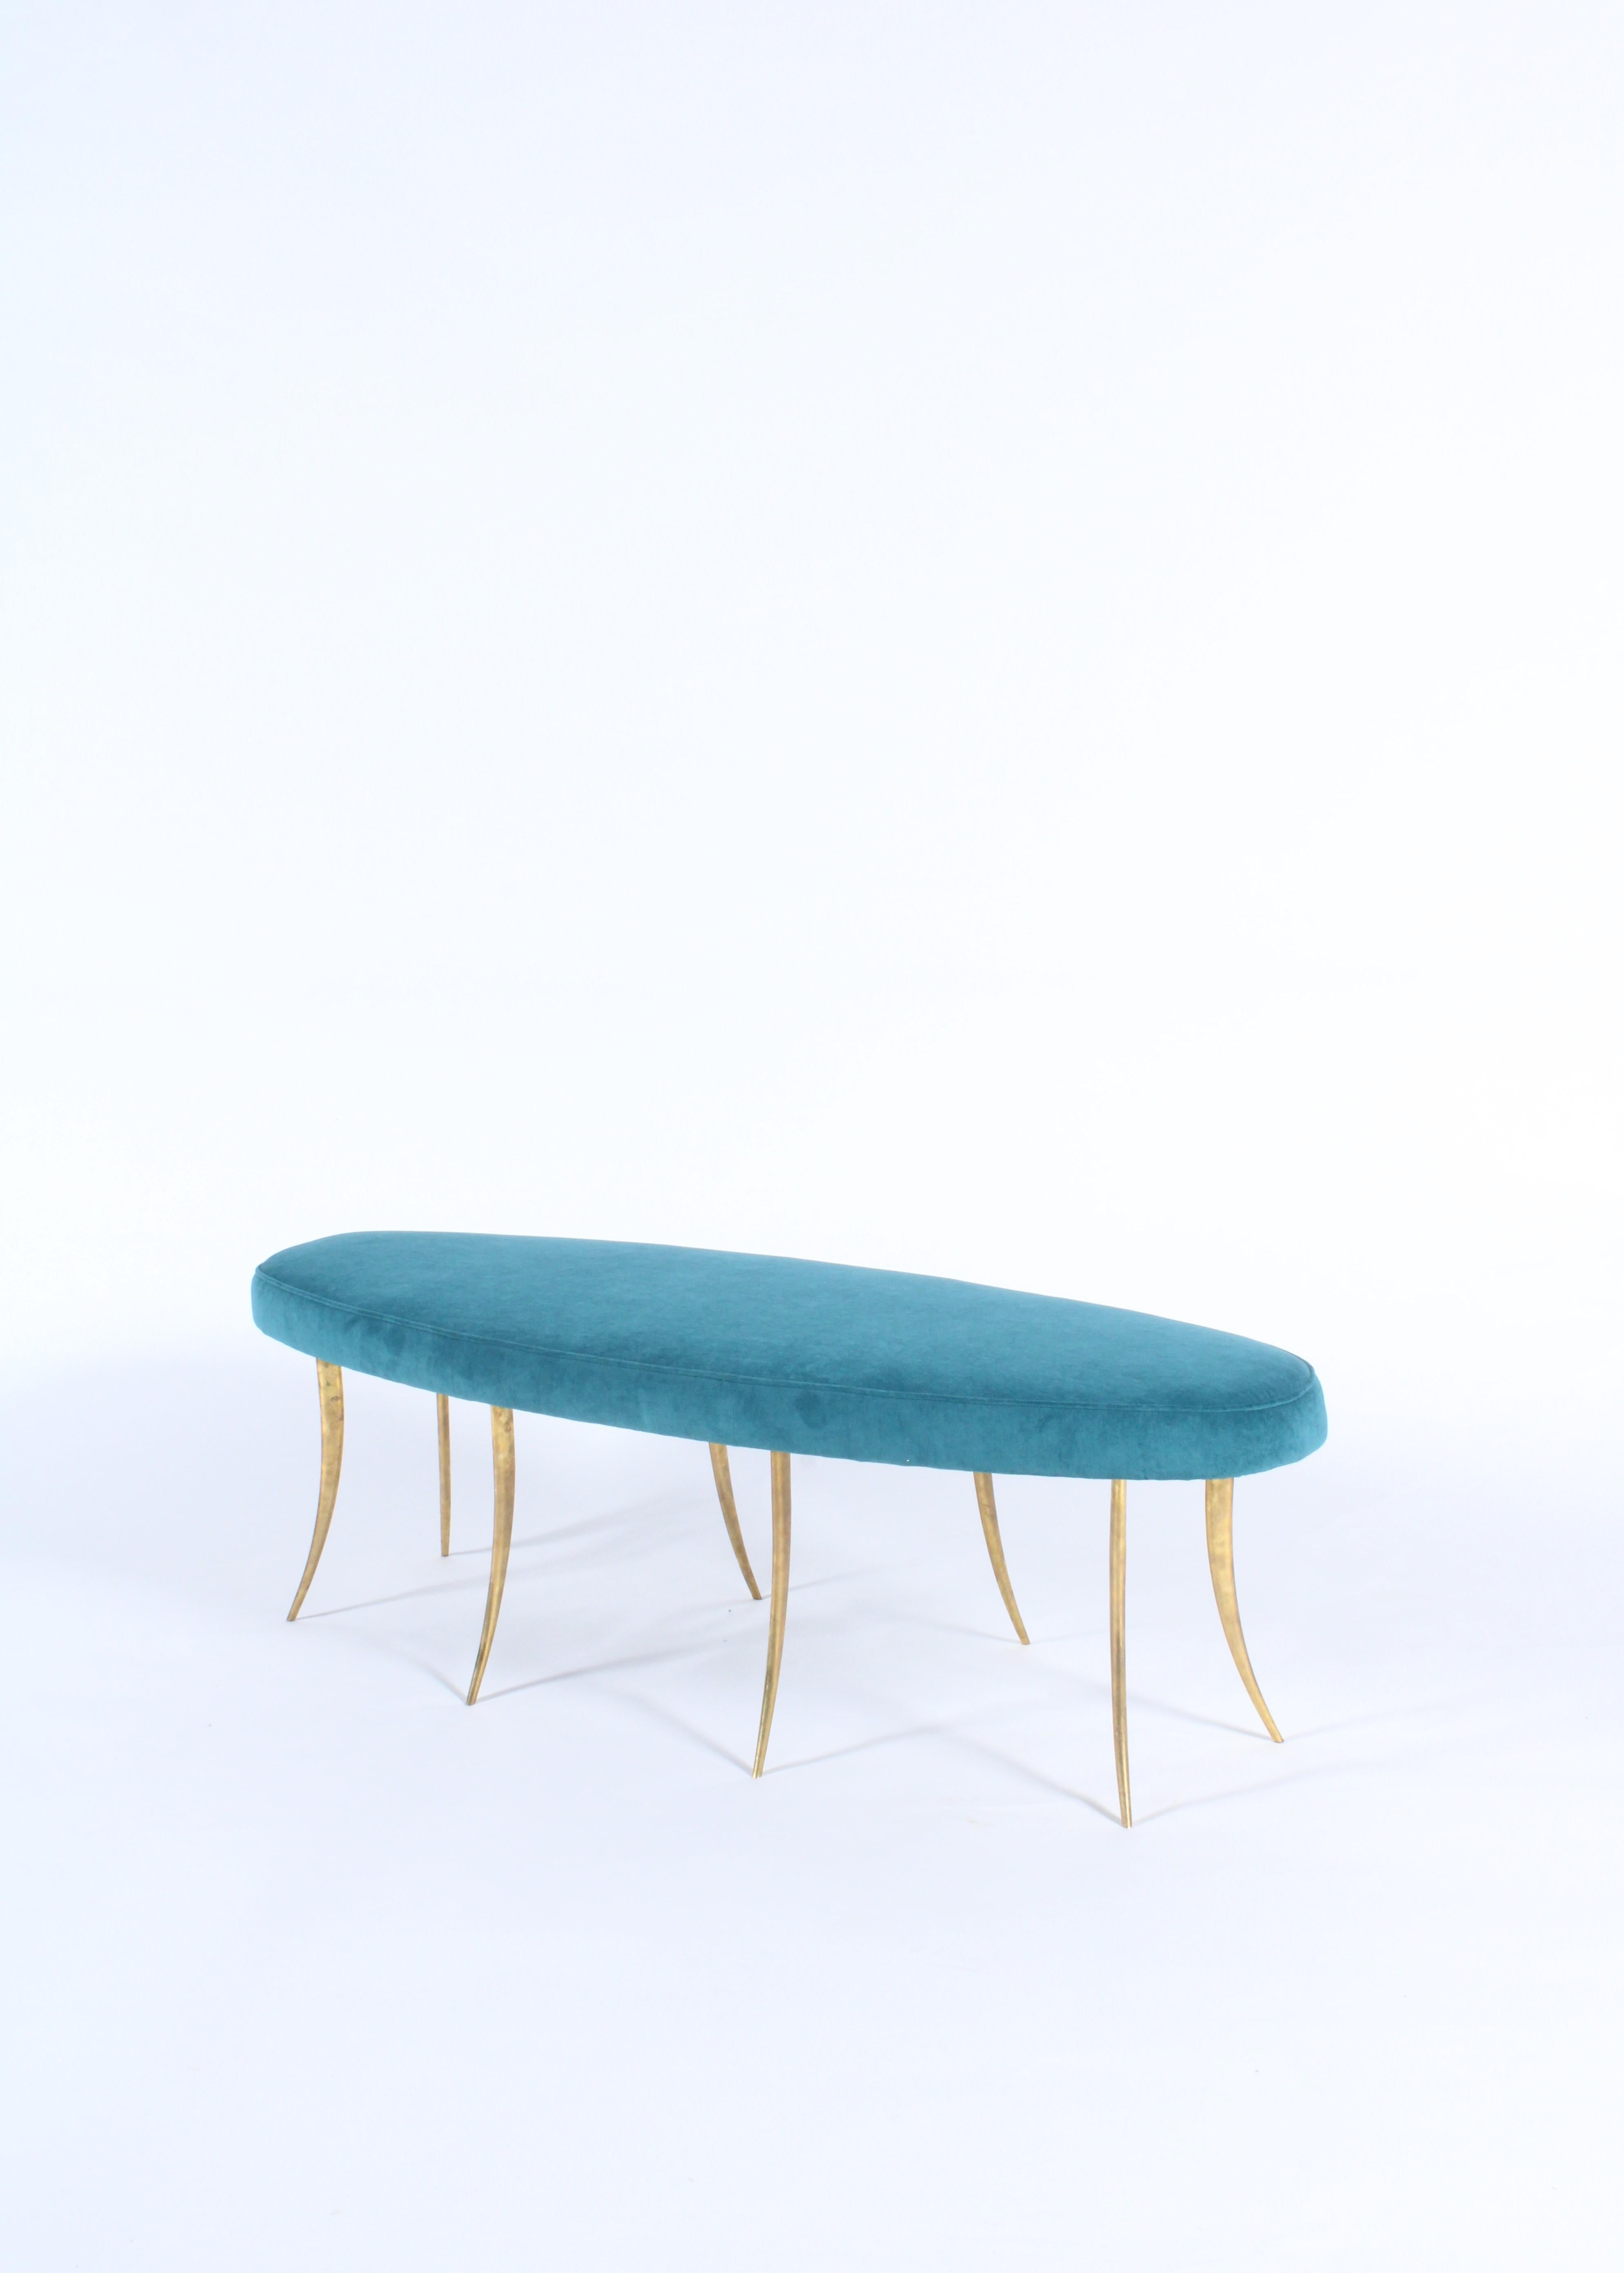 Late 20th Century  Bespoke Vintage Italian Bench with Teal Upholstered Cushion For Sale